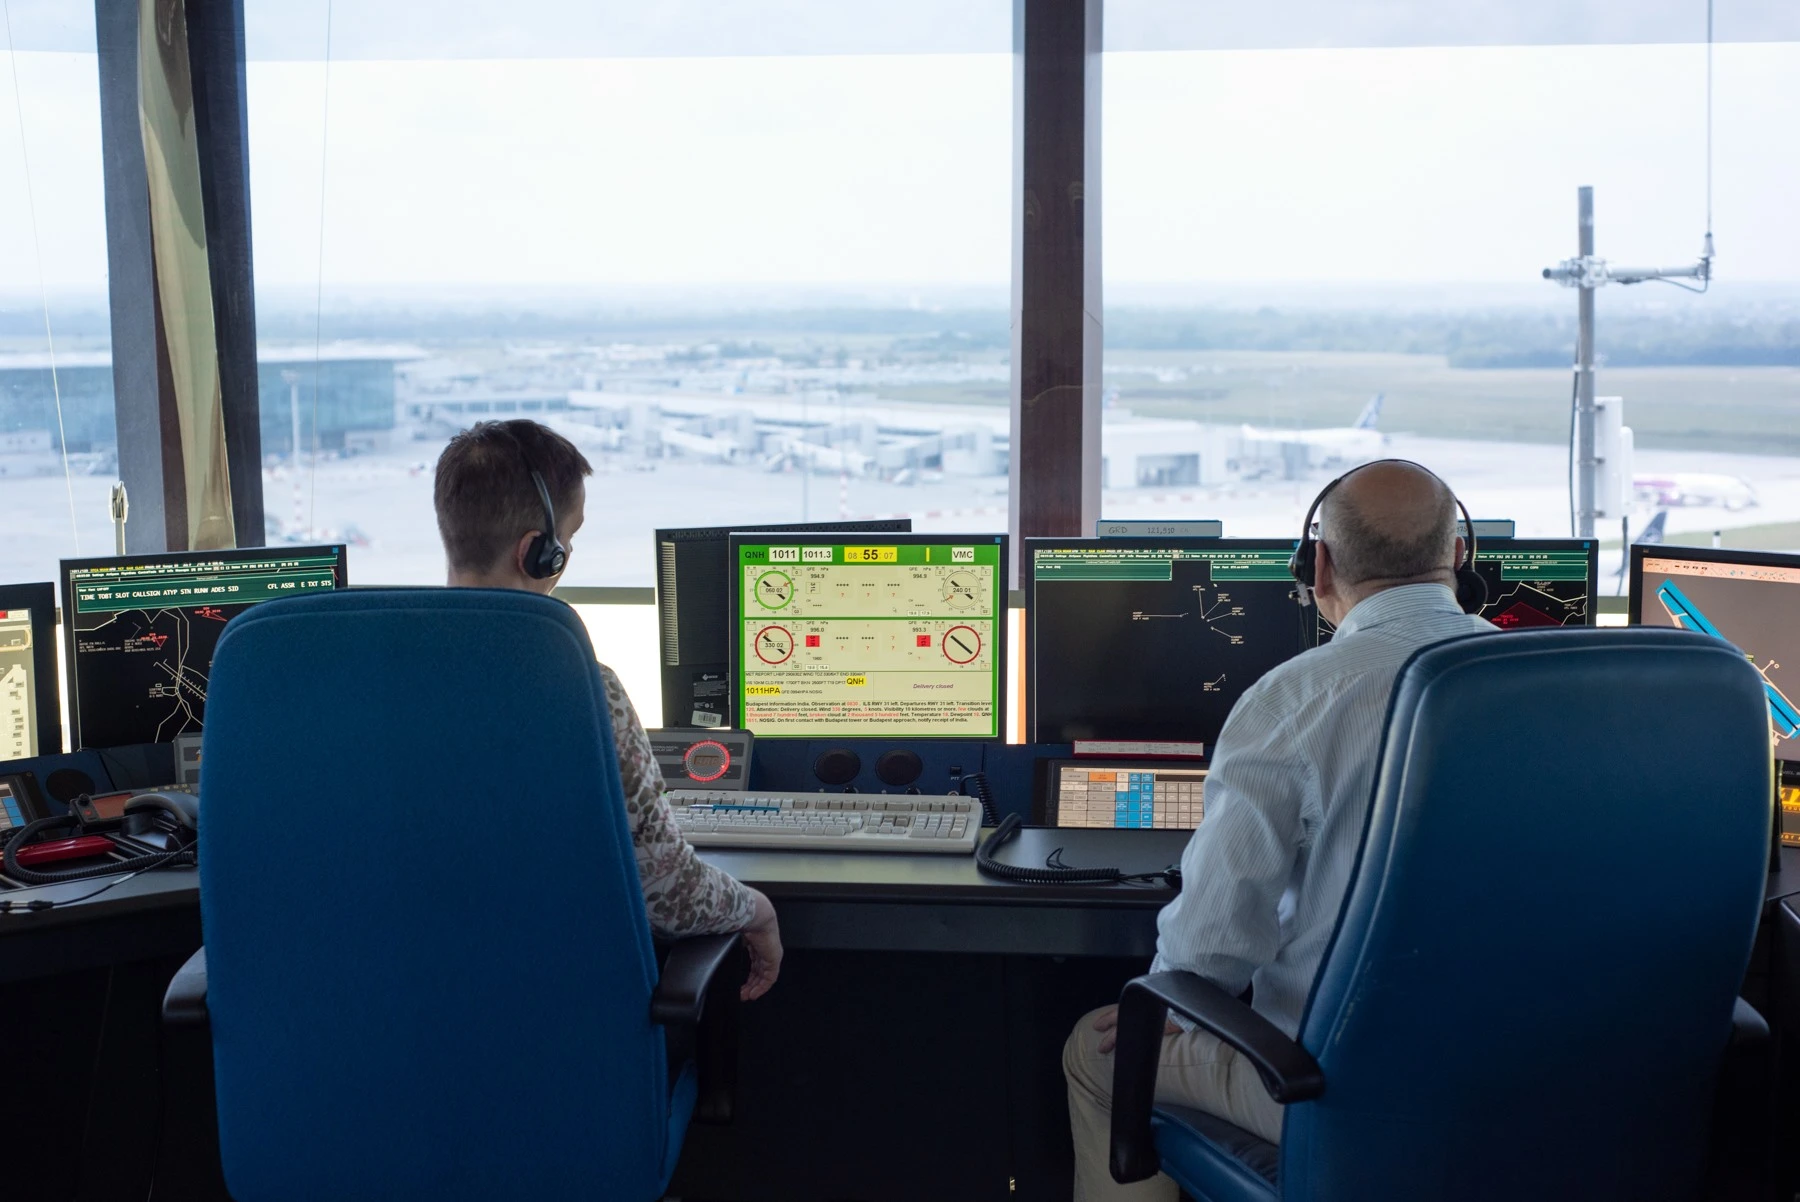 Austrian expert: Severe flight delays caused by Hungarian air traffic controllers